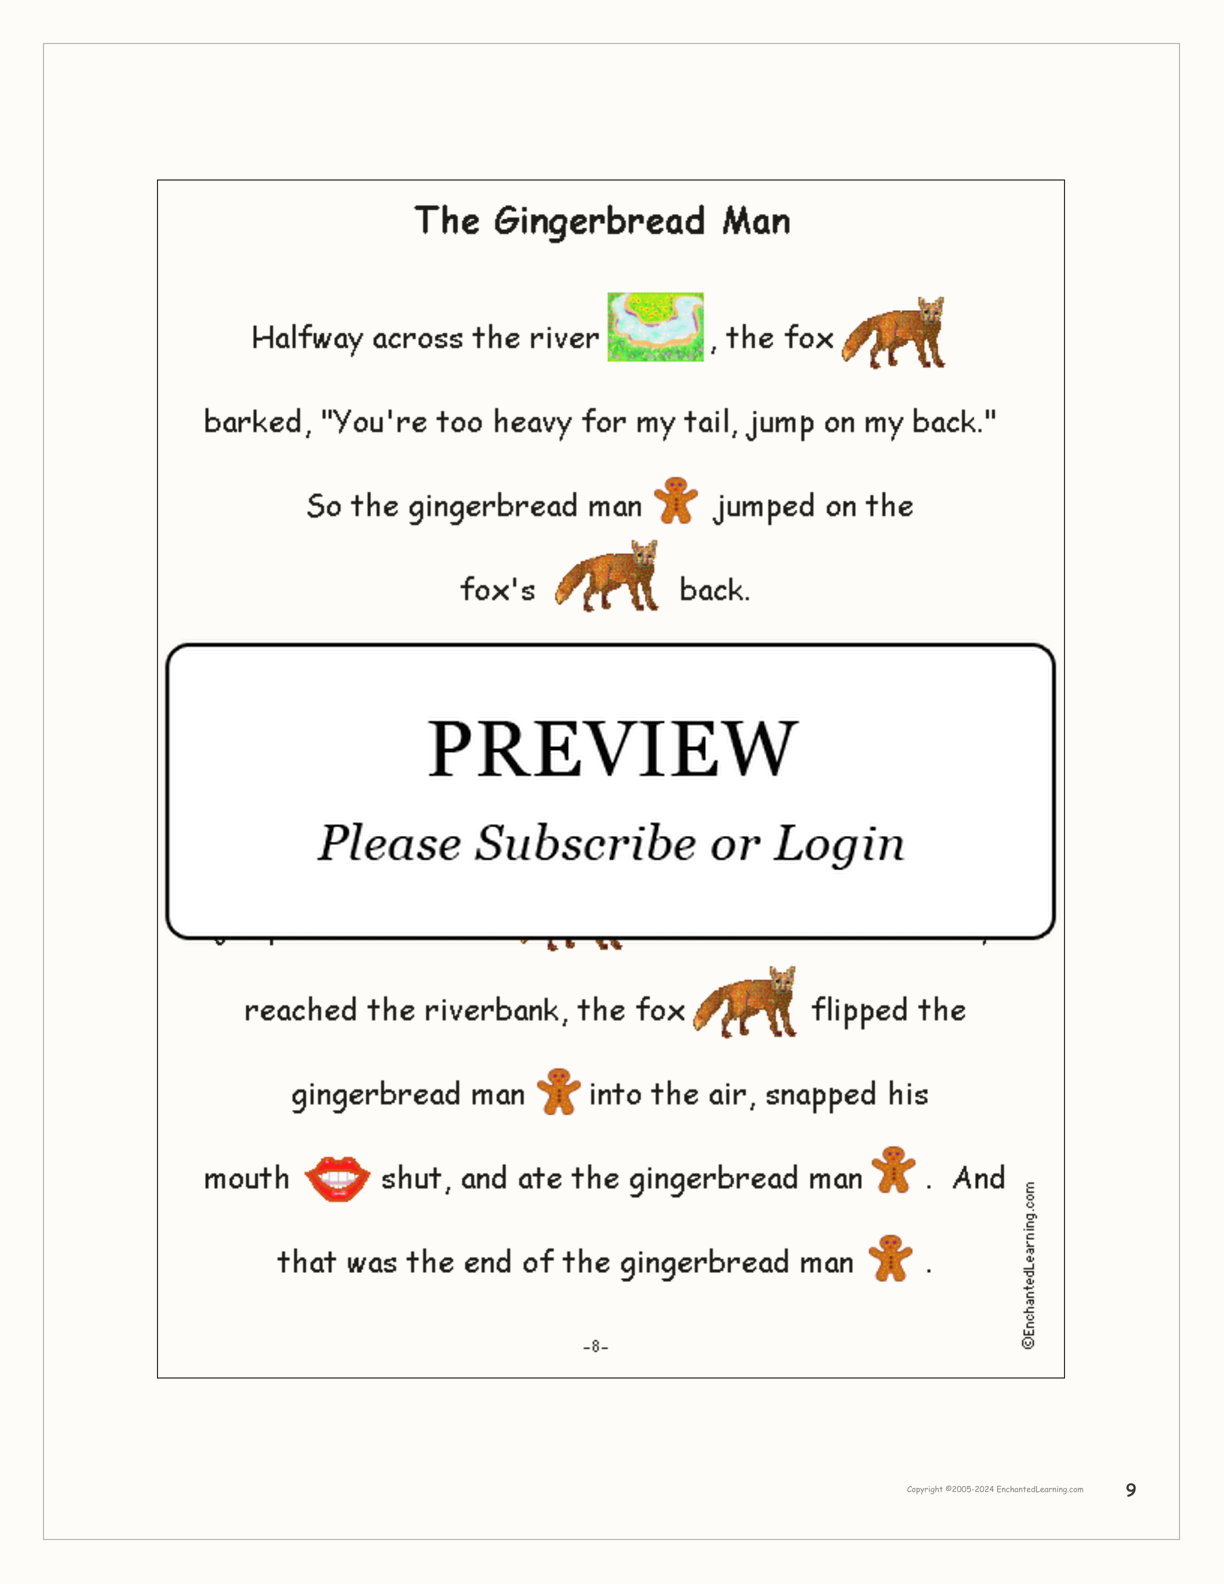 'The Gingerbread Man' Book interactive printout page 9